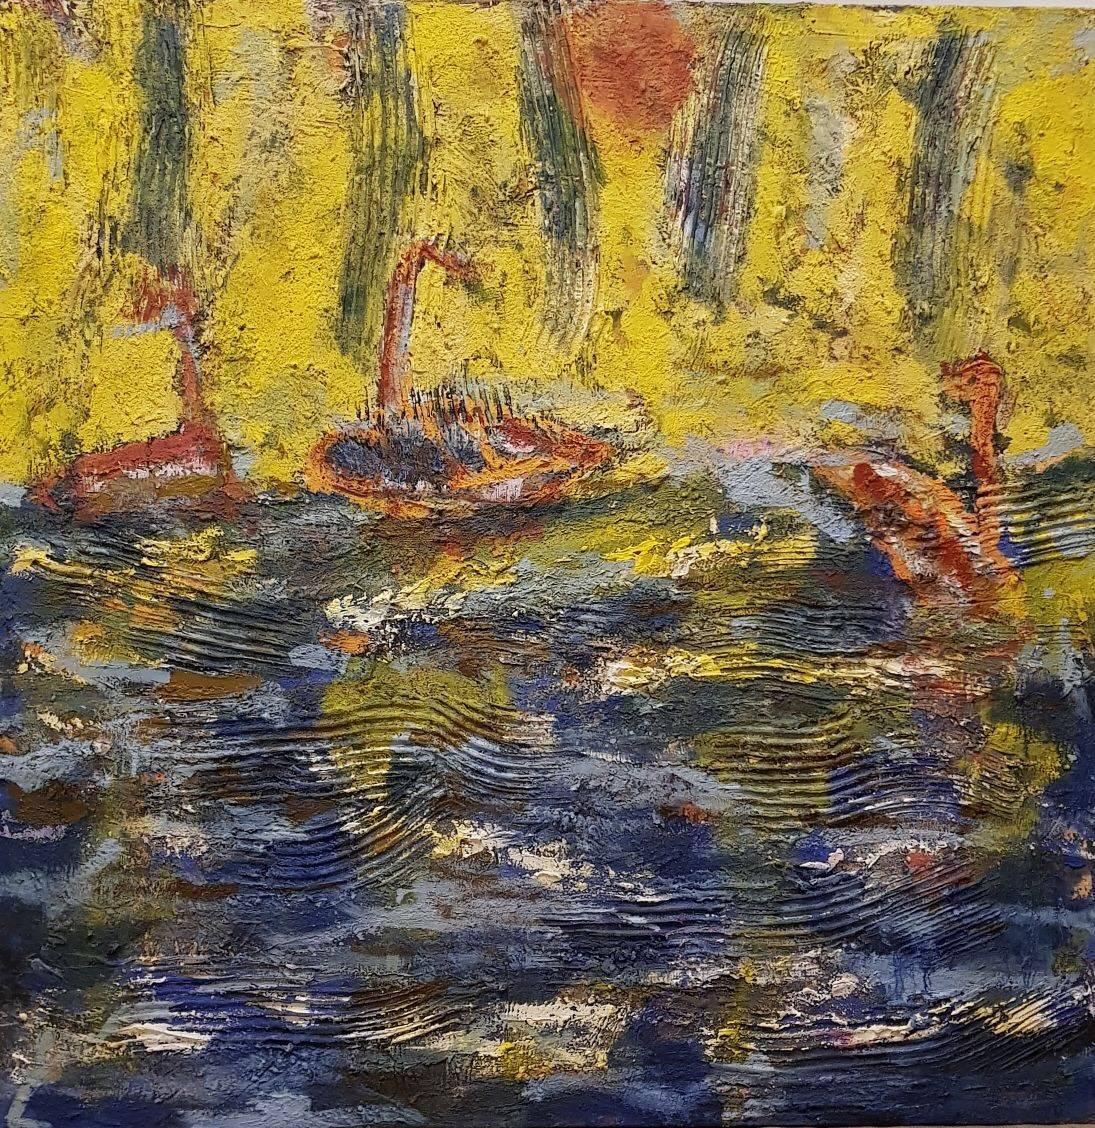 Ocean Ships Landscape Mixed Media Painting Oil on Linen Abstract Expressionism